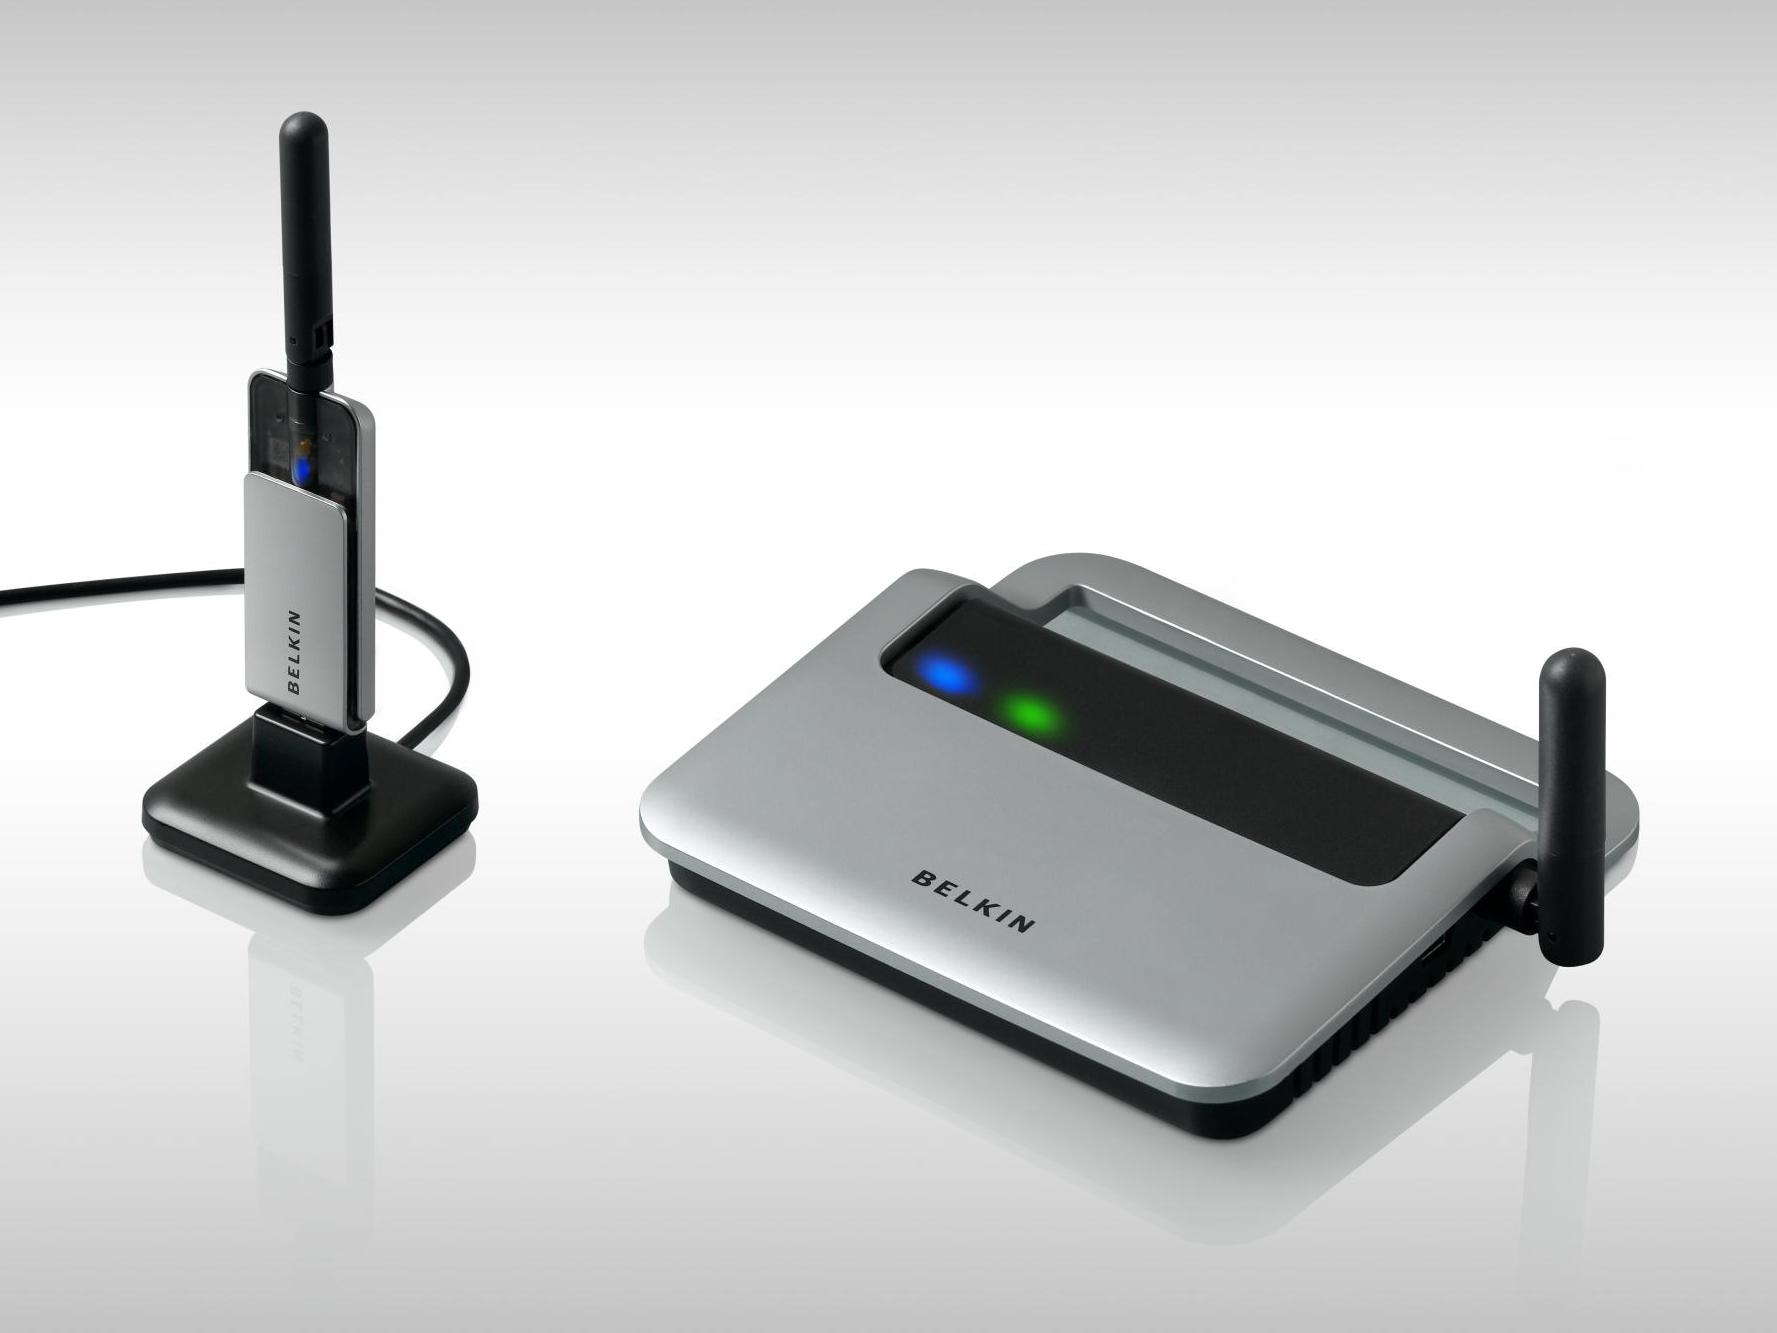 How To Make Belkin Wireless Router Secure